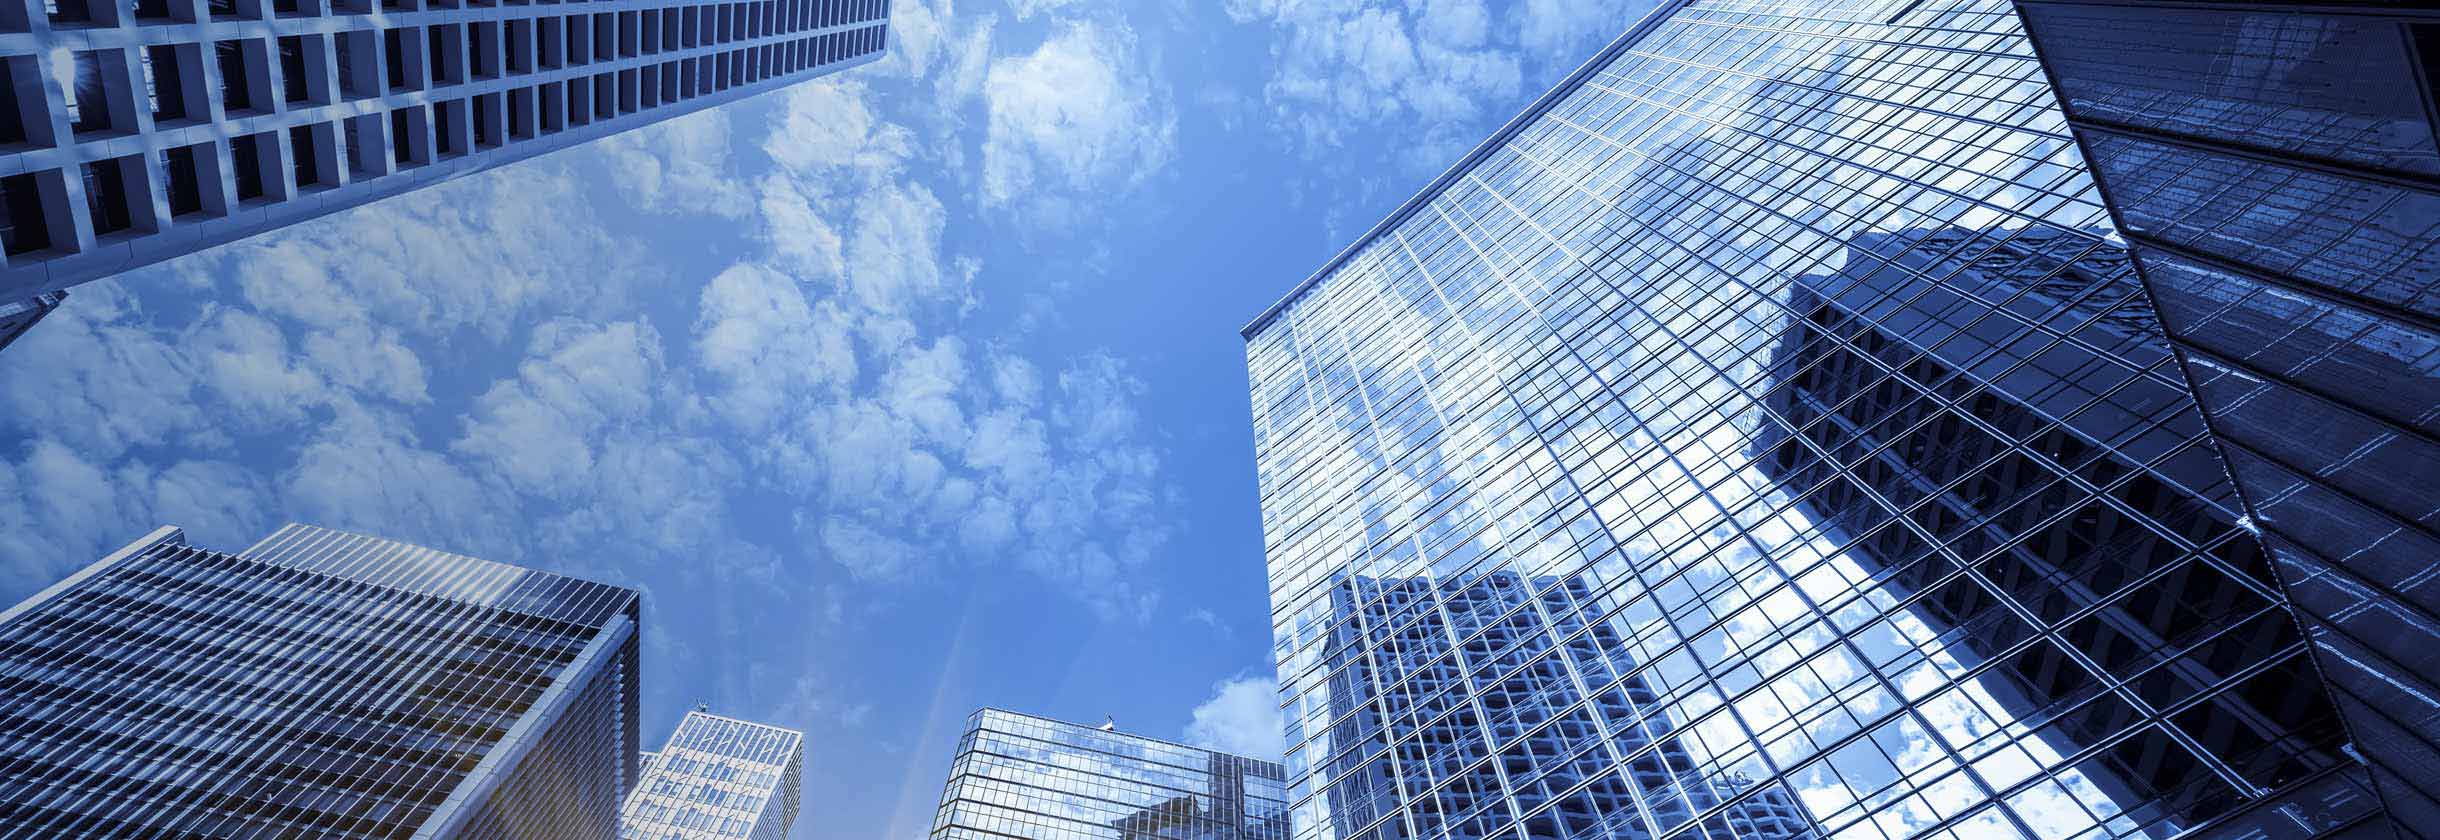 Skyscrapers for investment real estate